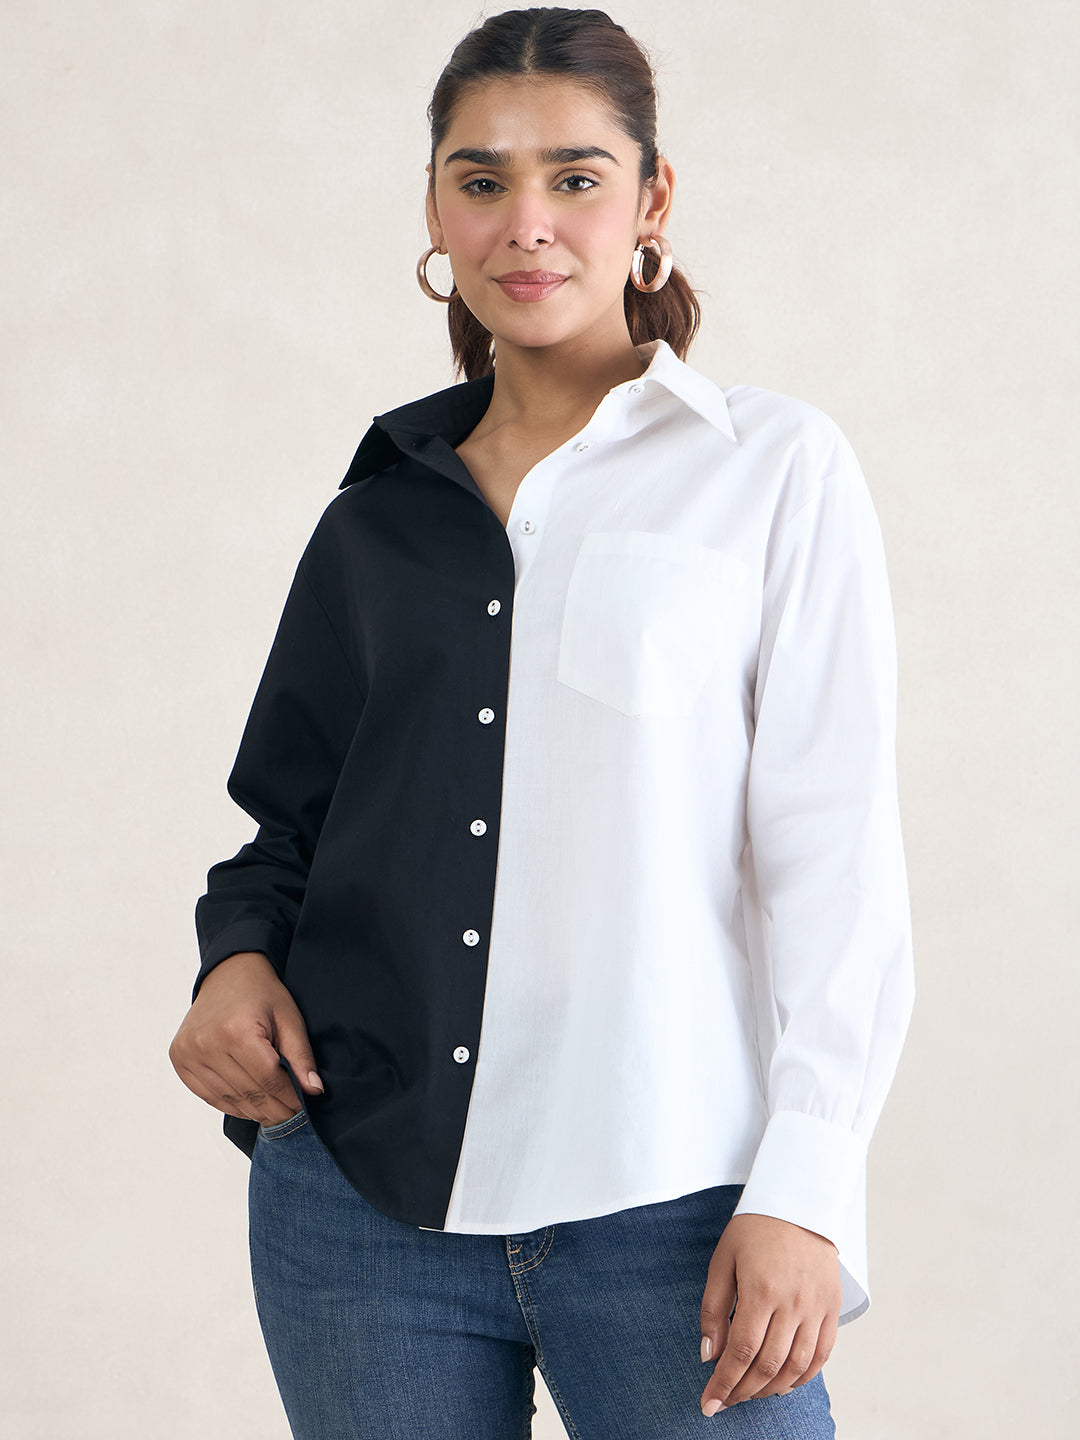 Black And White Colorblock Shirt